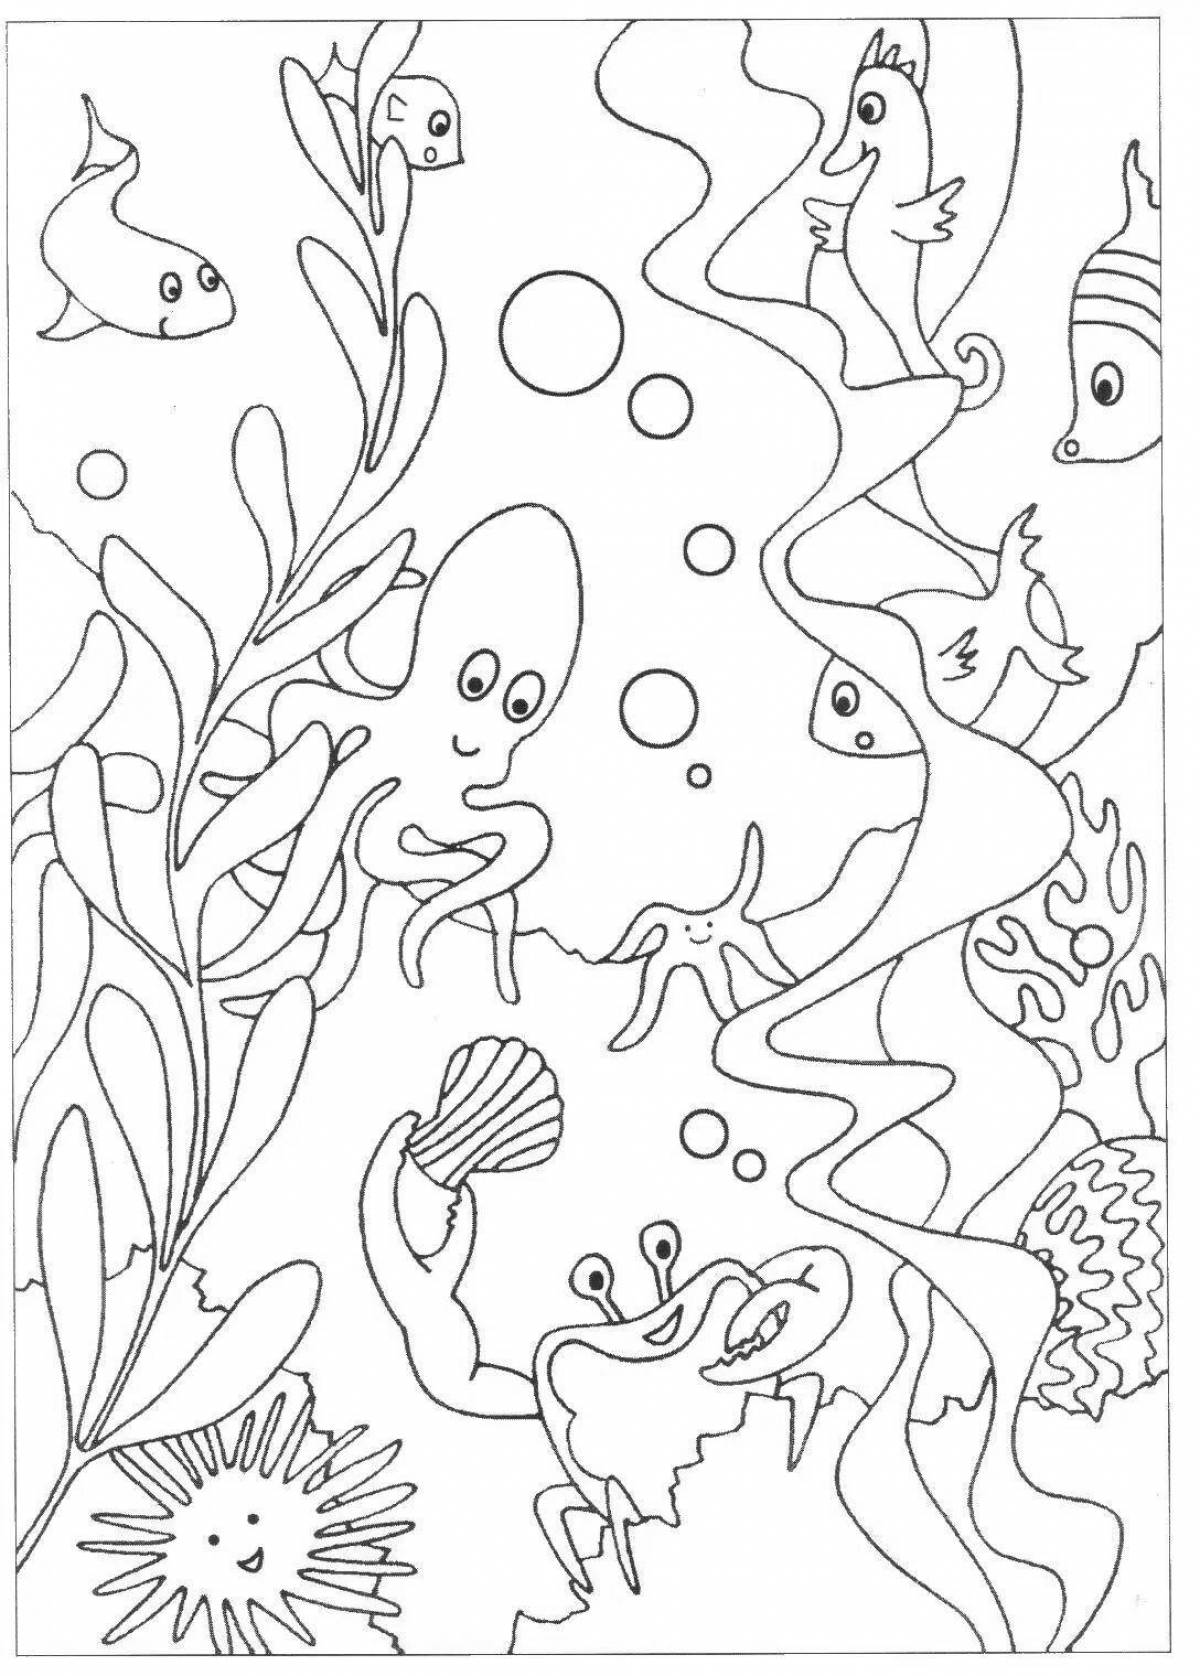 Fun coloring of the seabed for kids